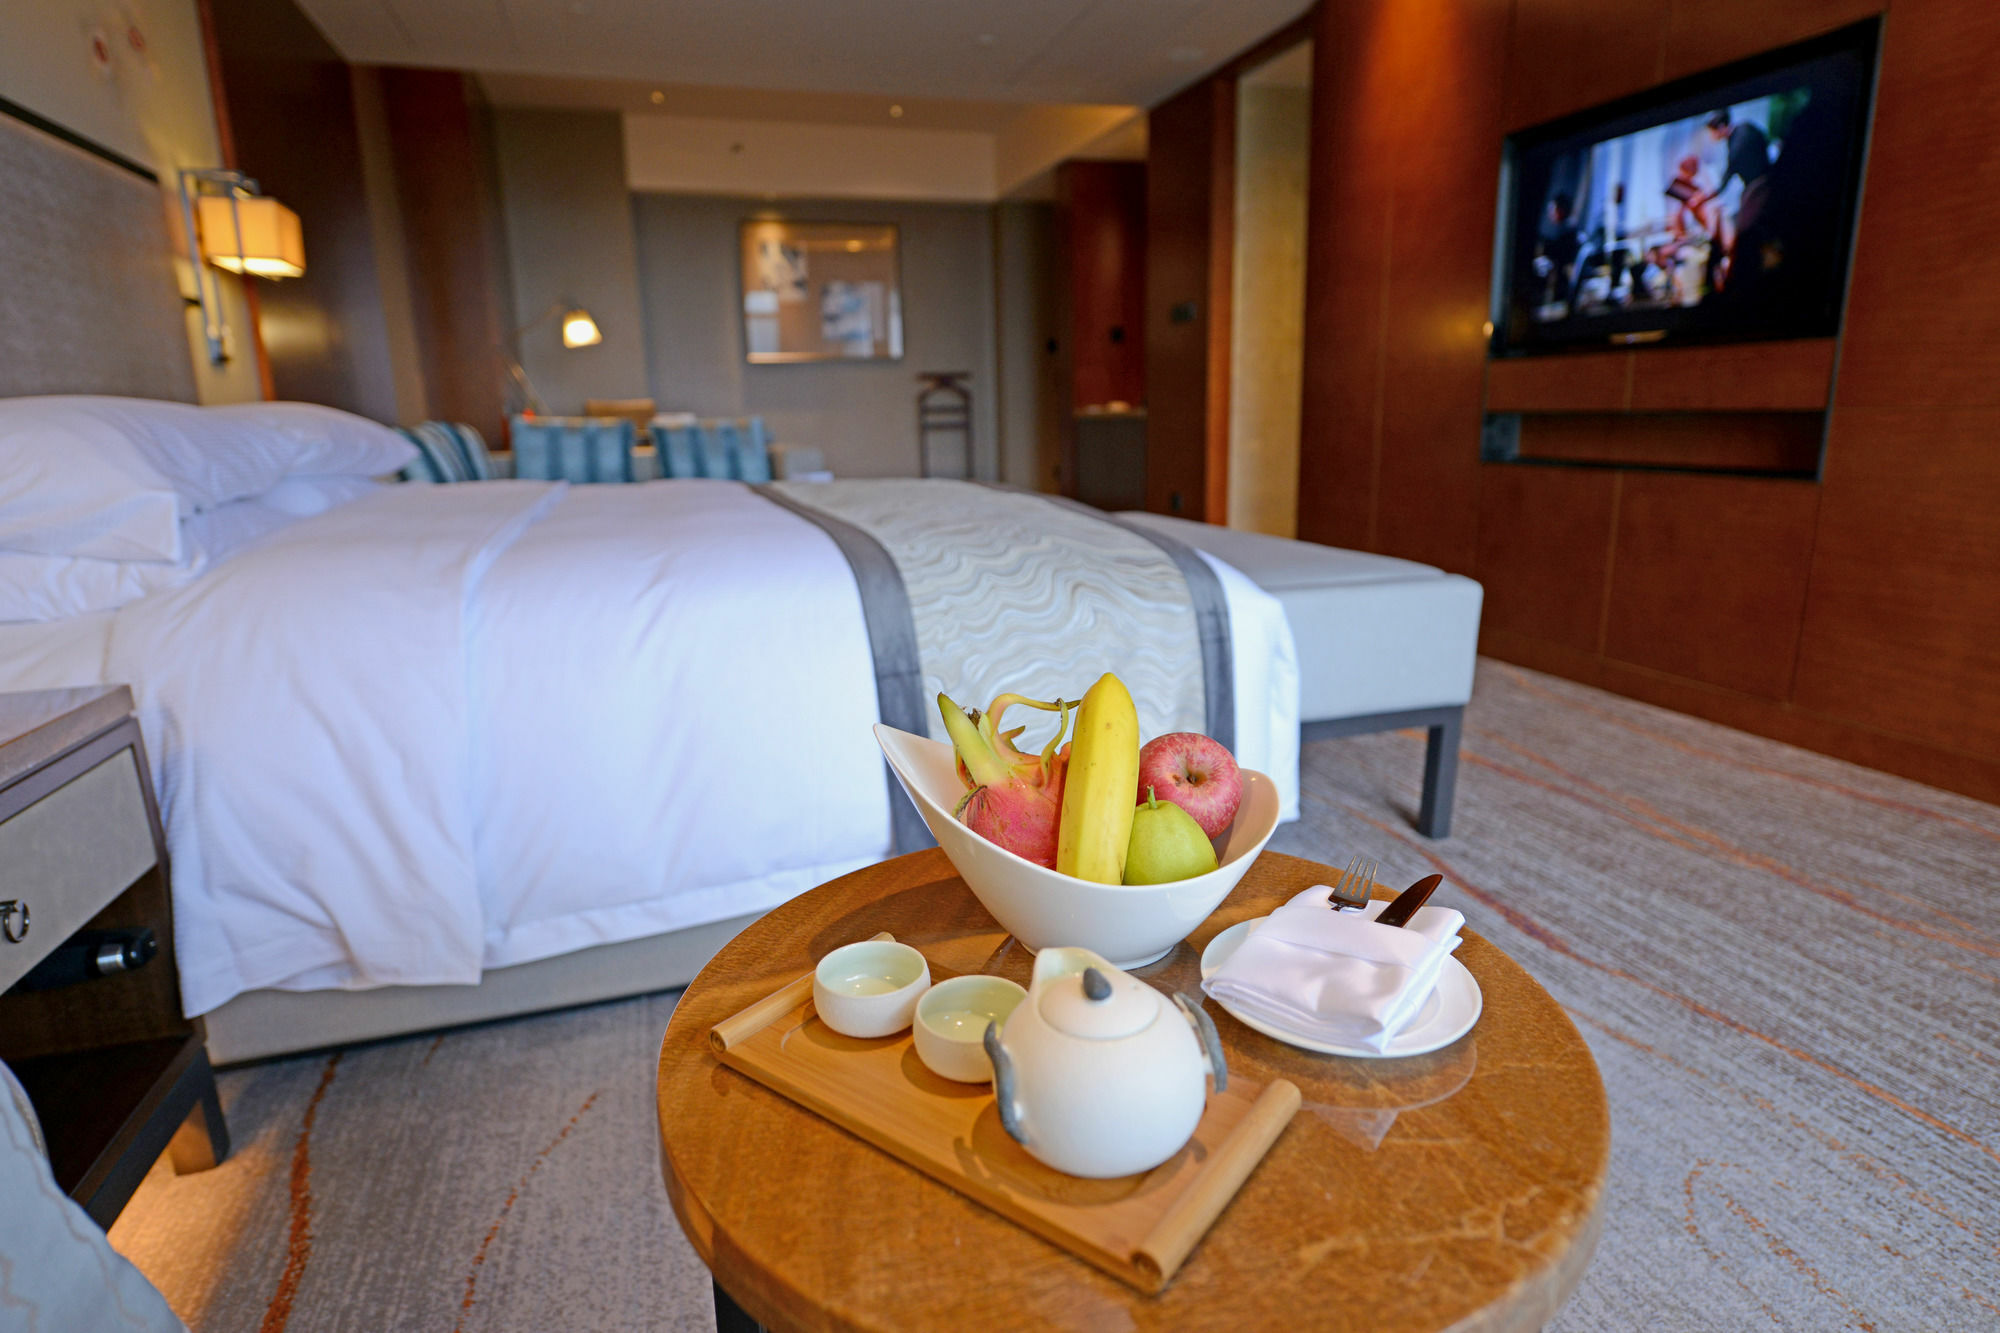 Doubletree By Hilton Hotel Guangzhou-Science City-Free Shuttle Bus To Canton Fair Complex And Dining Offer Kültér fotó